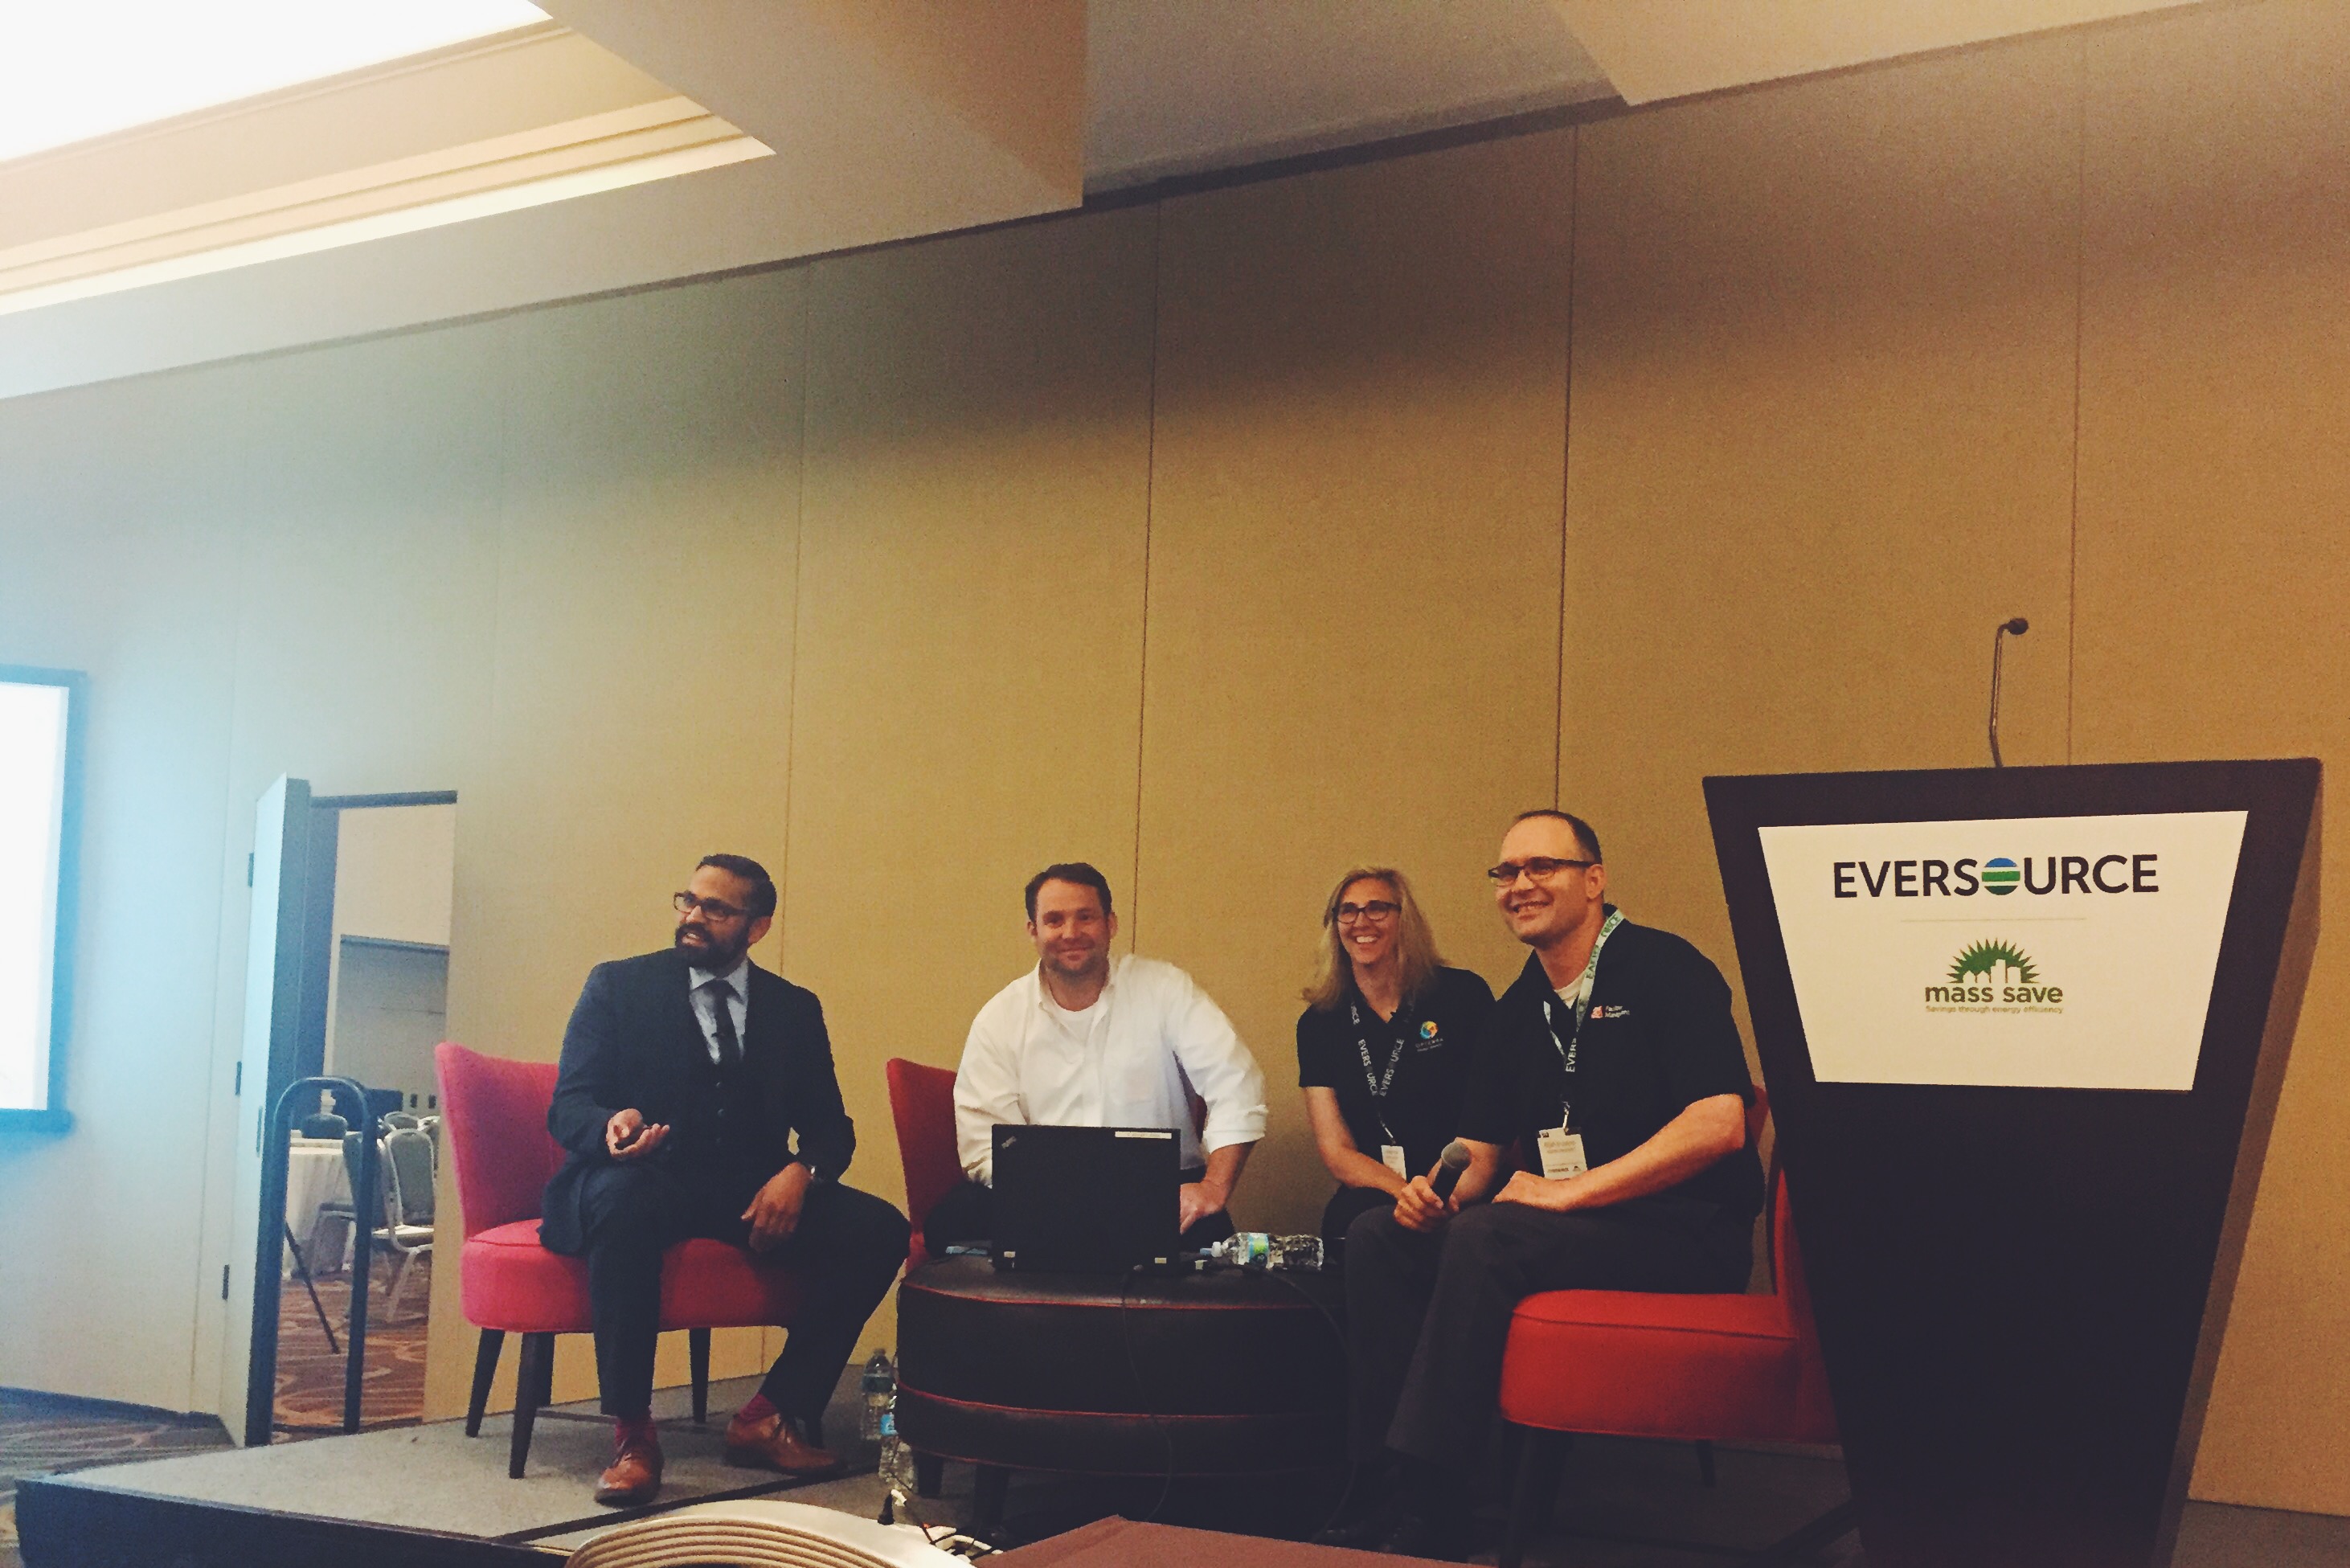 Left to Right: Moderator, Roshan Bhakta, Douglas Case from Daintree Networks, Elijah Ercolino from Boston University, and Karen Peck from Opterra Energy Services discussing how we can harness the full power of high performance lighting with network controls. 